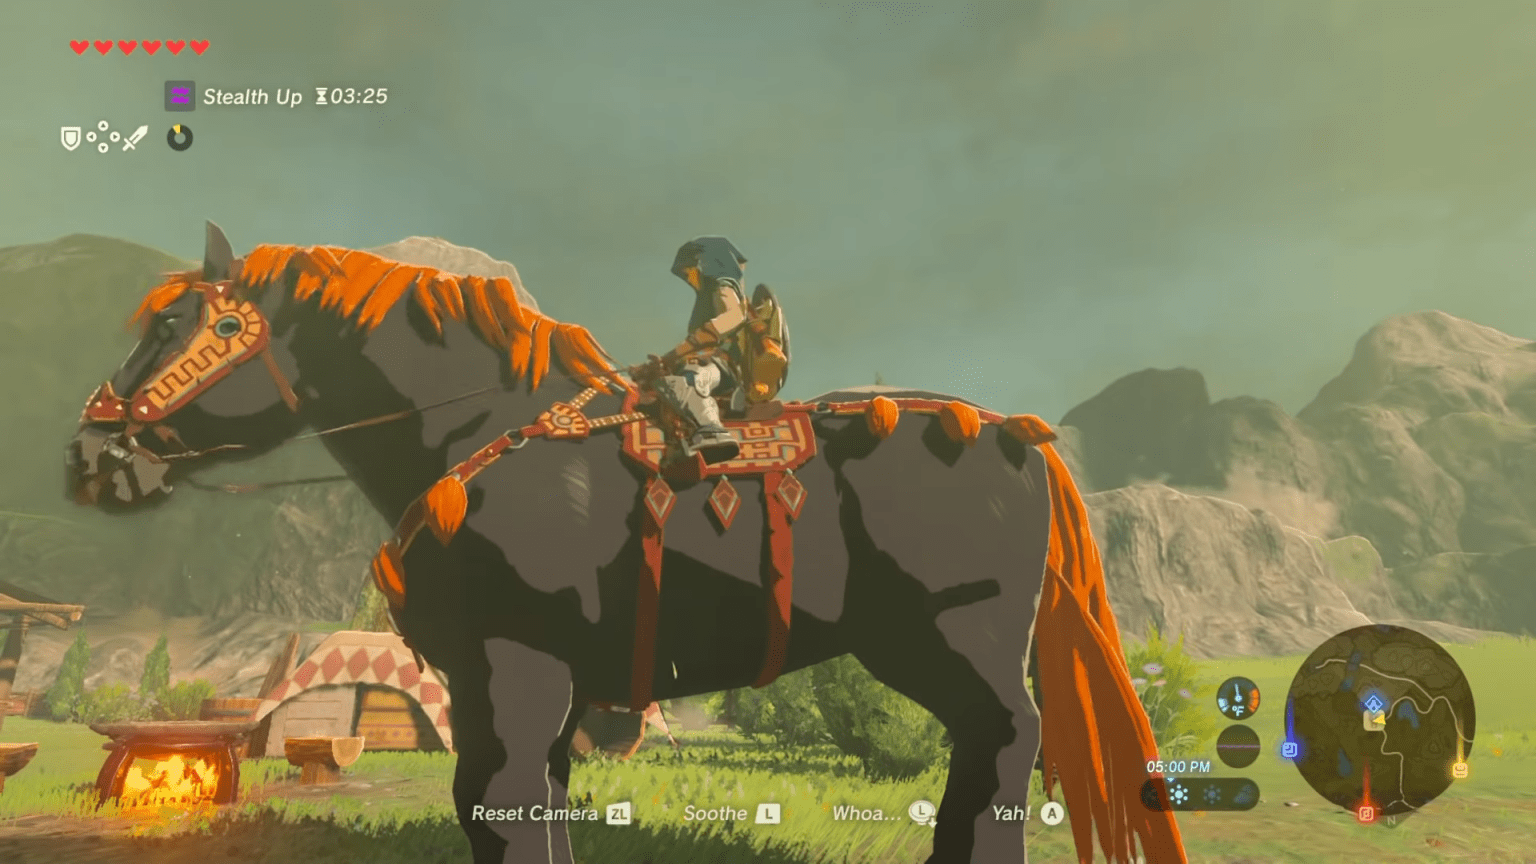 how to play zelda breath of the wild on pc